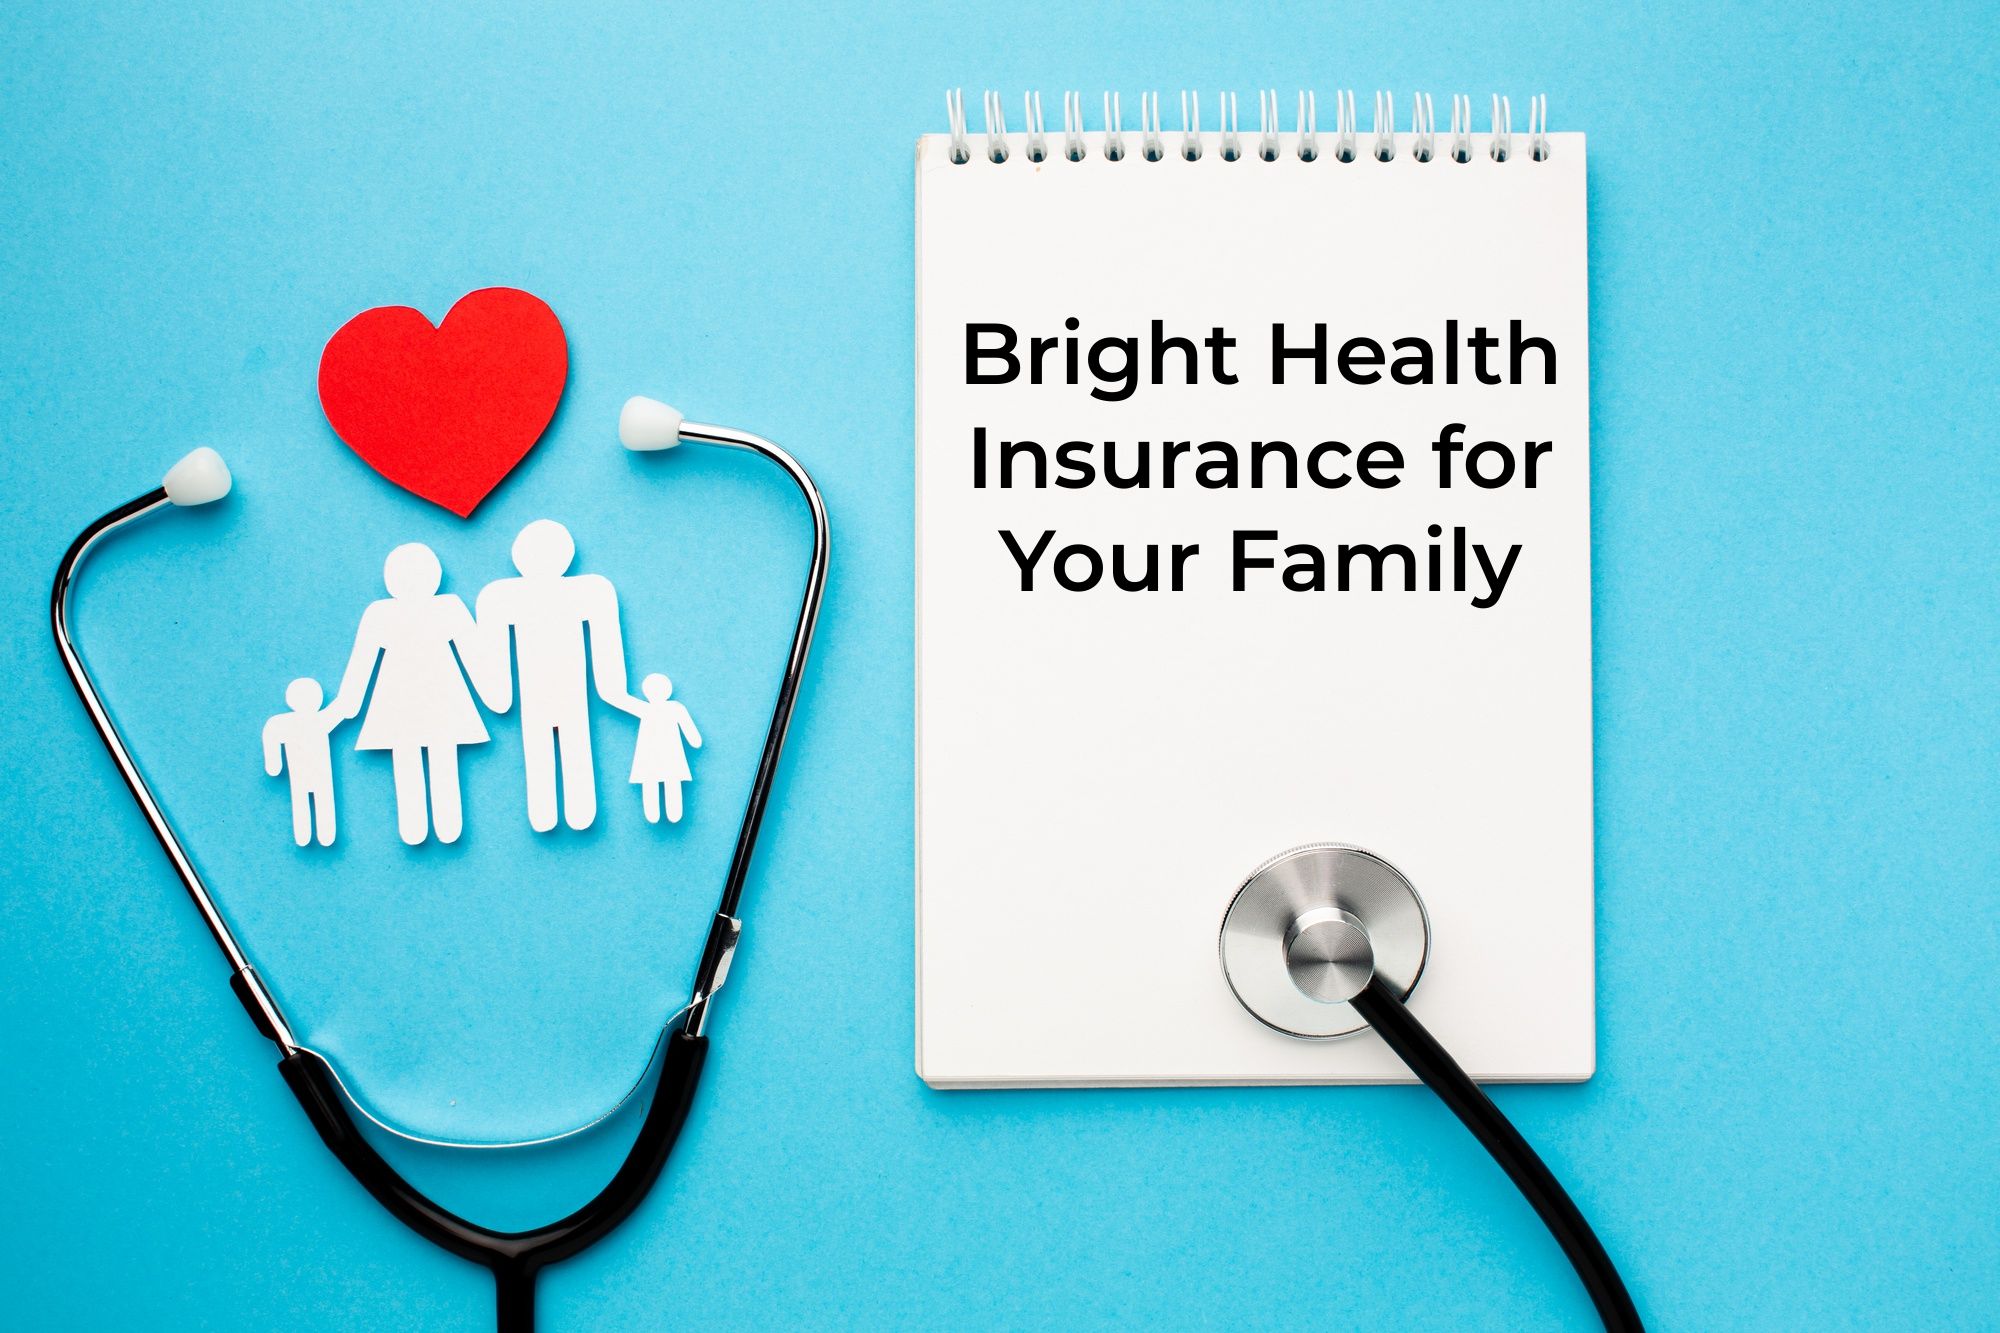 Bright Health Insurance for Your Family